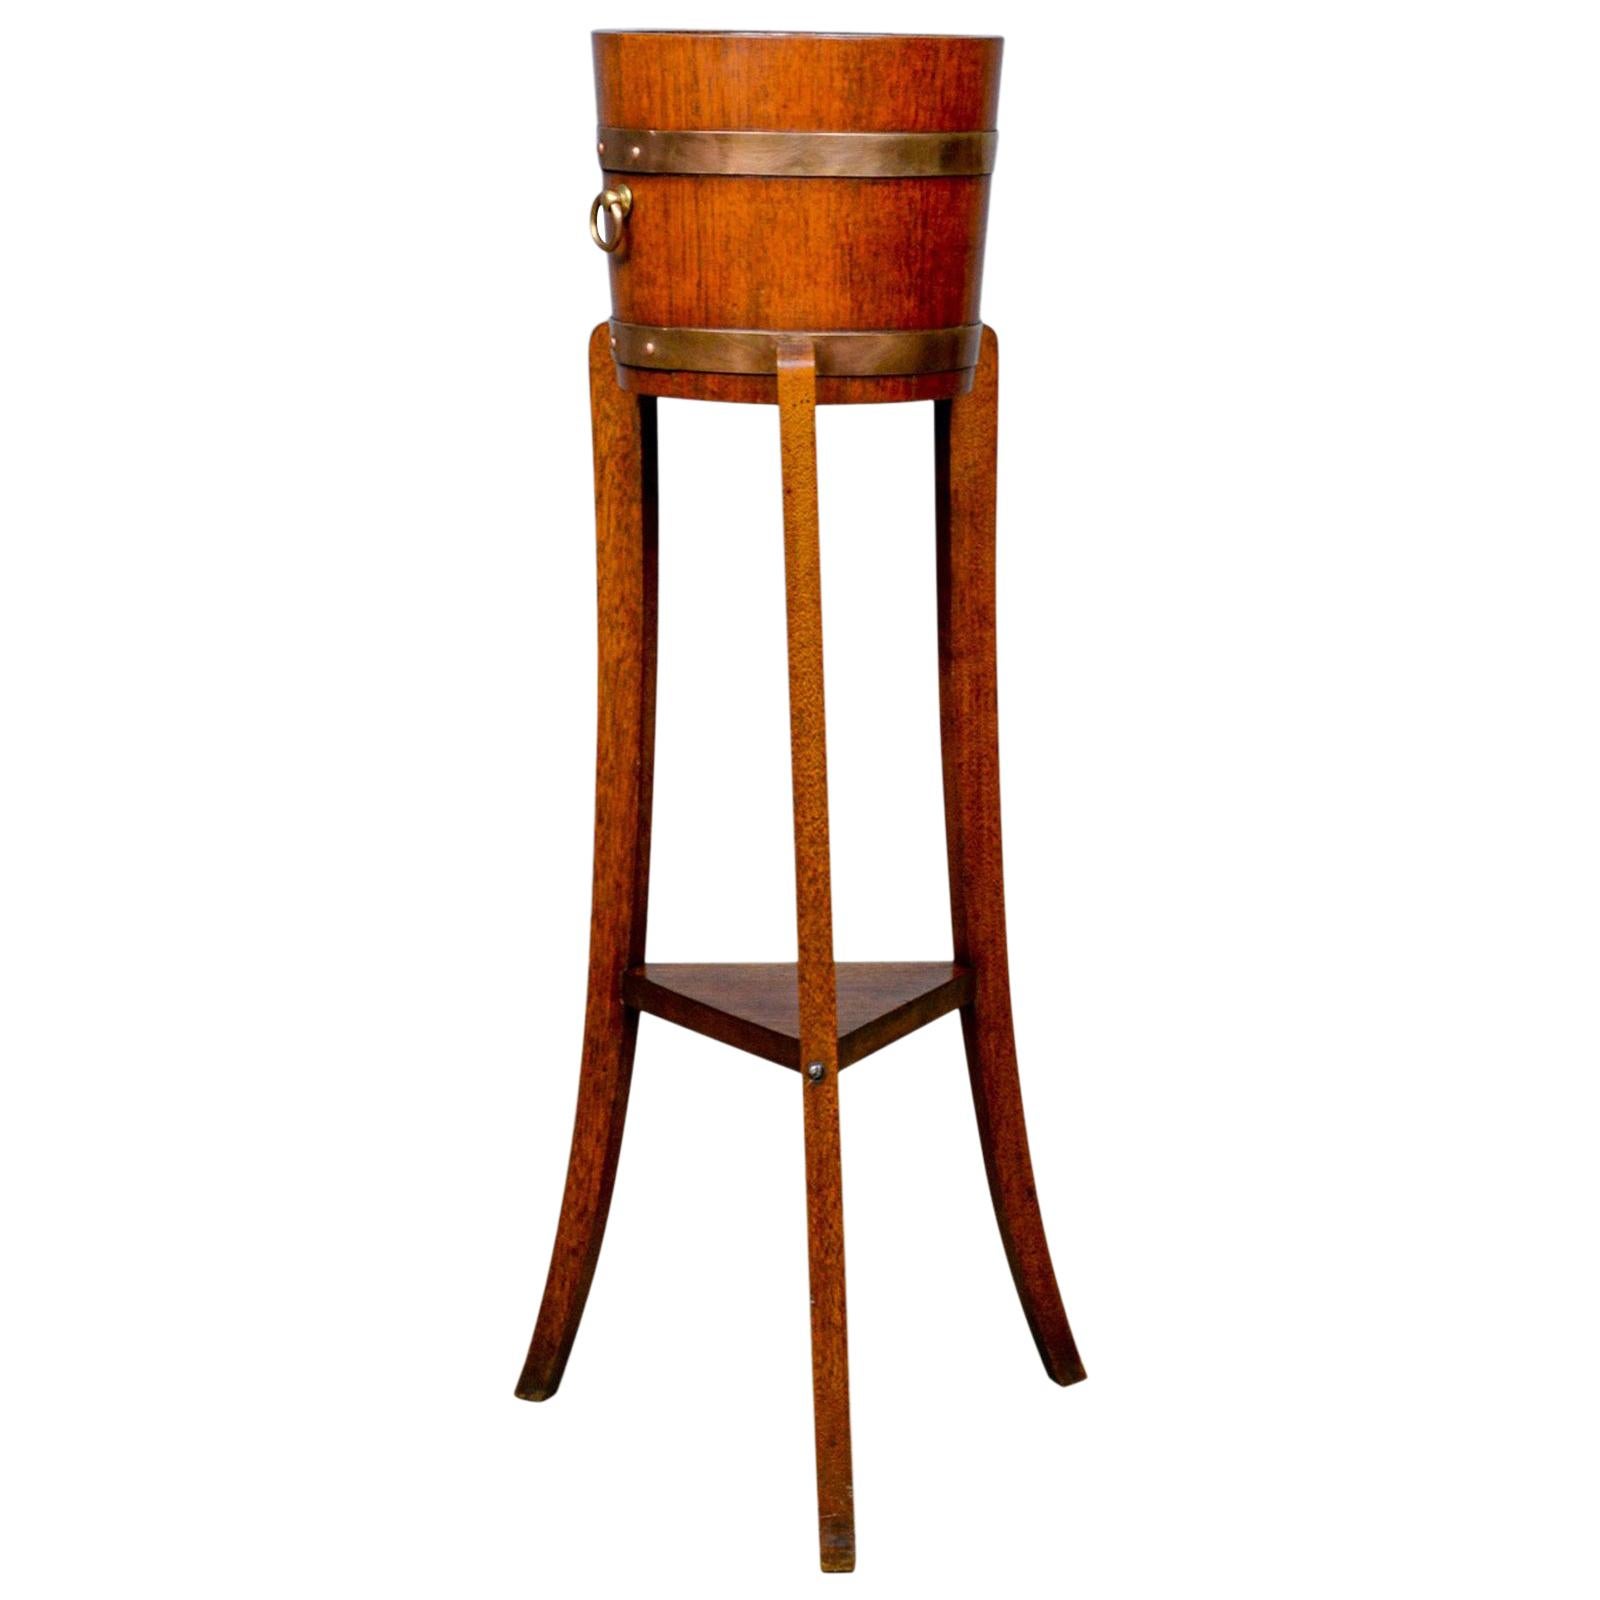 Antique Jardiniere, Arts & Crafts, Coopered Barrel on Stand, Lister, circa 1900